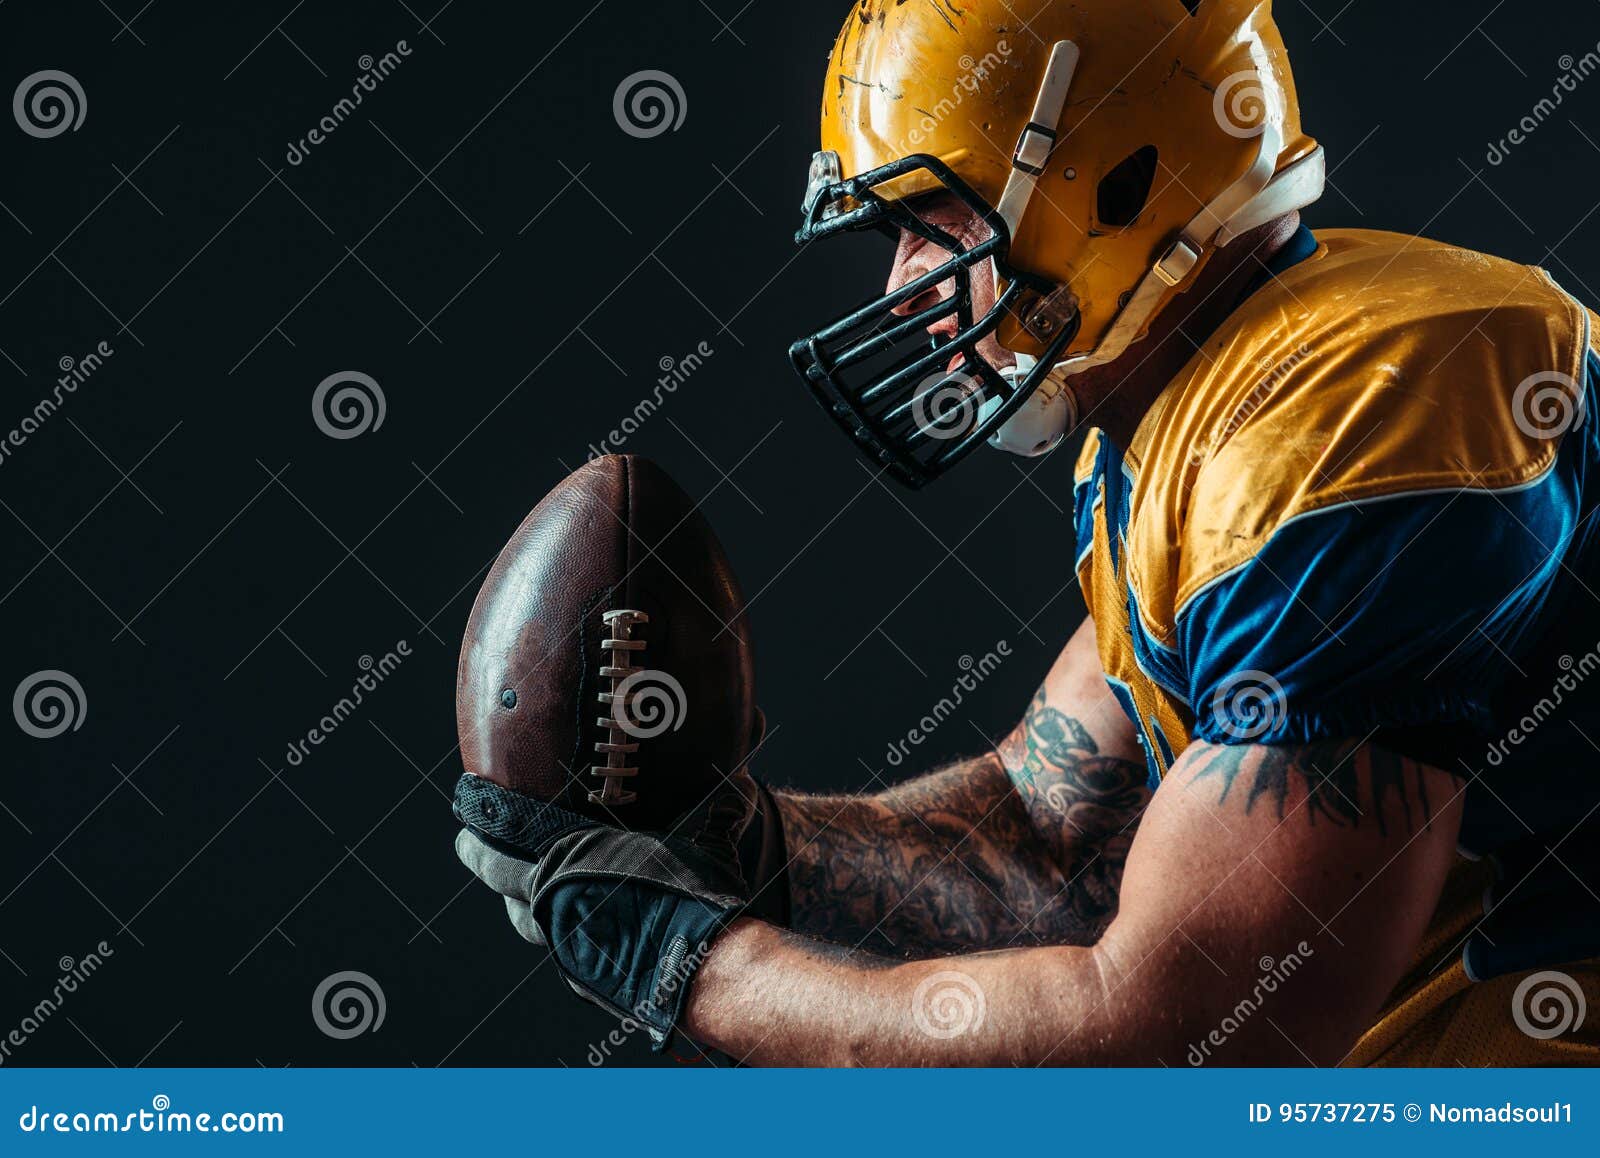 american football offensive player with ball